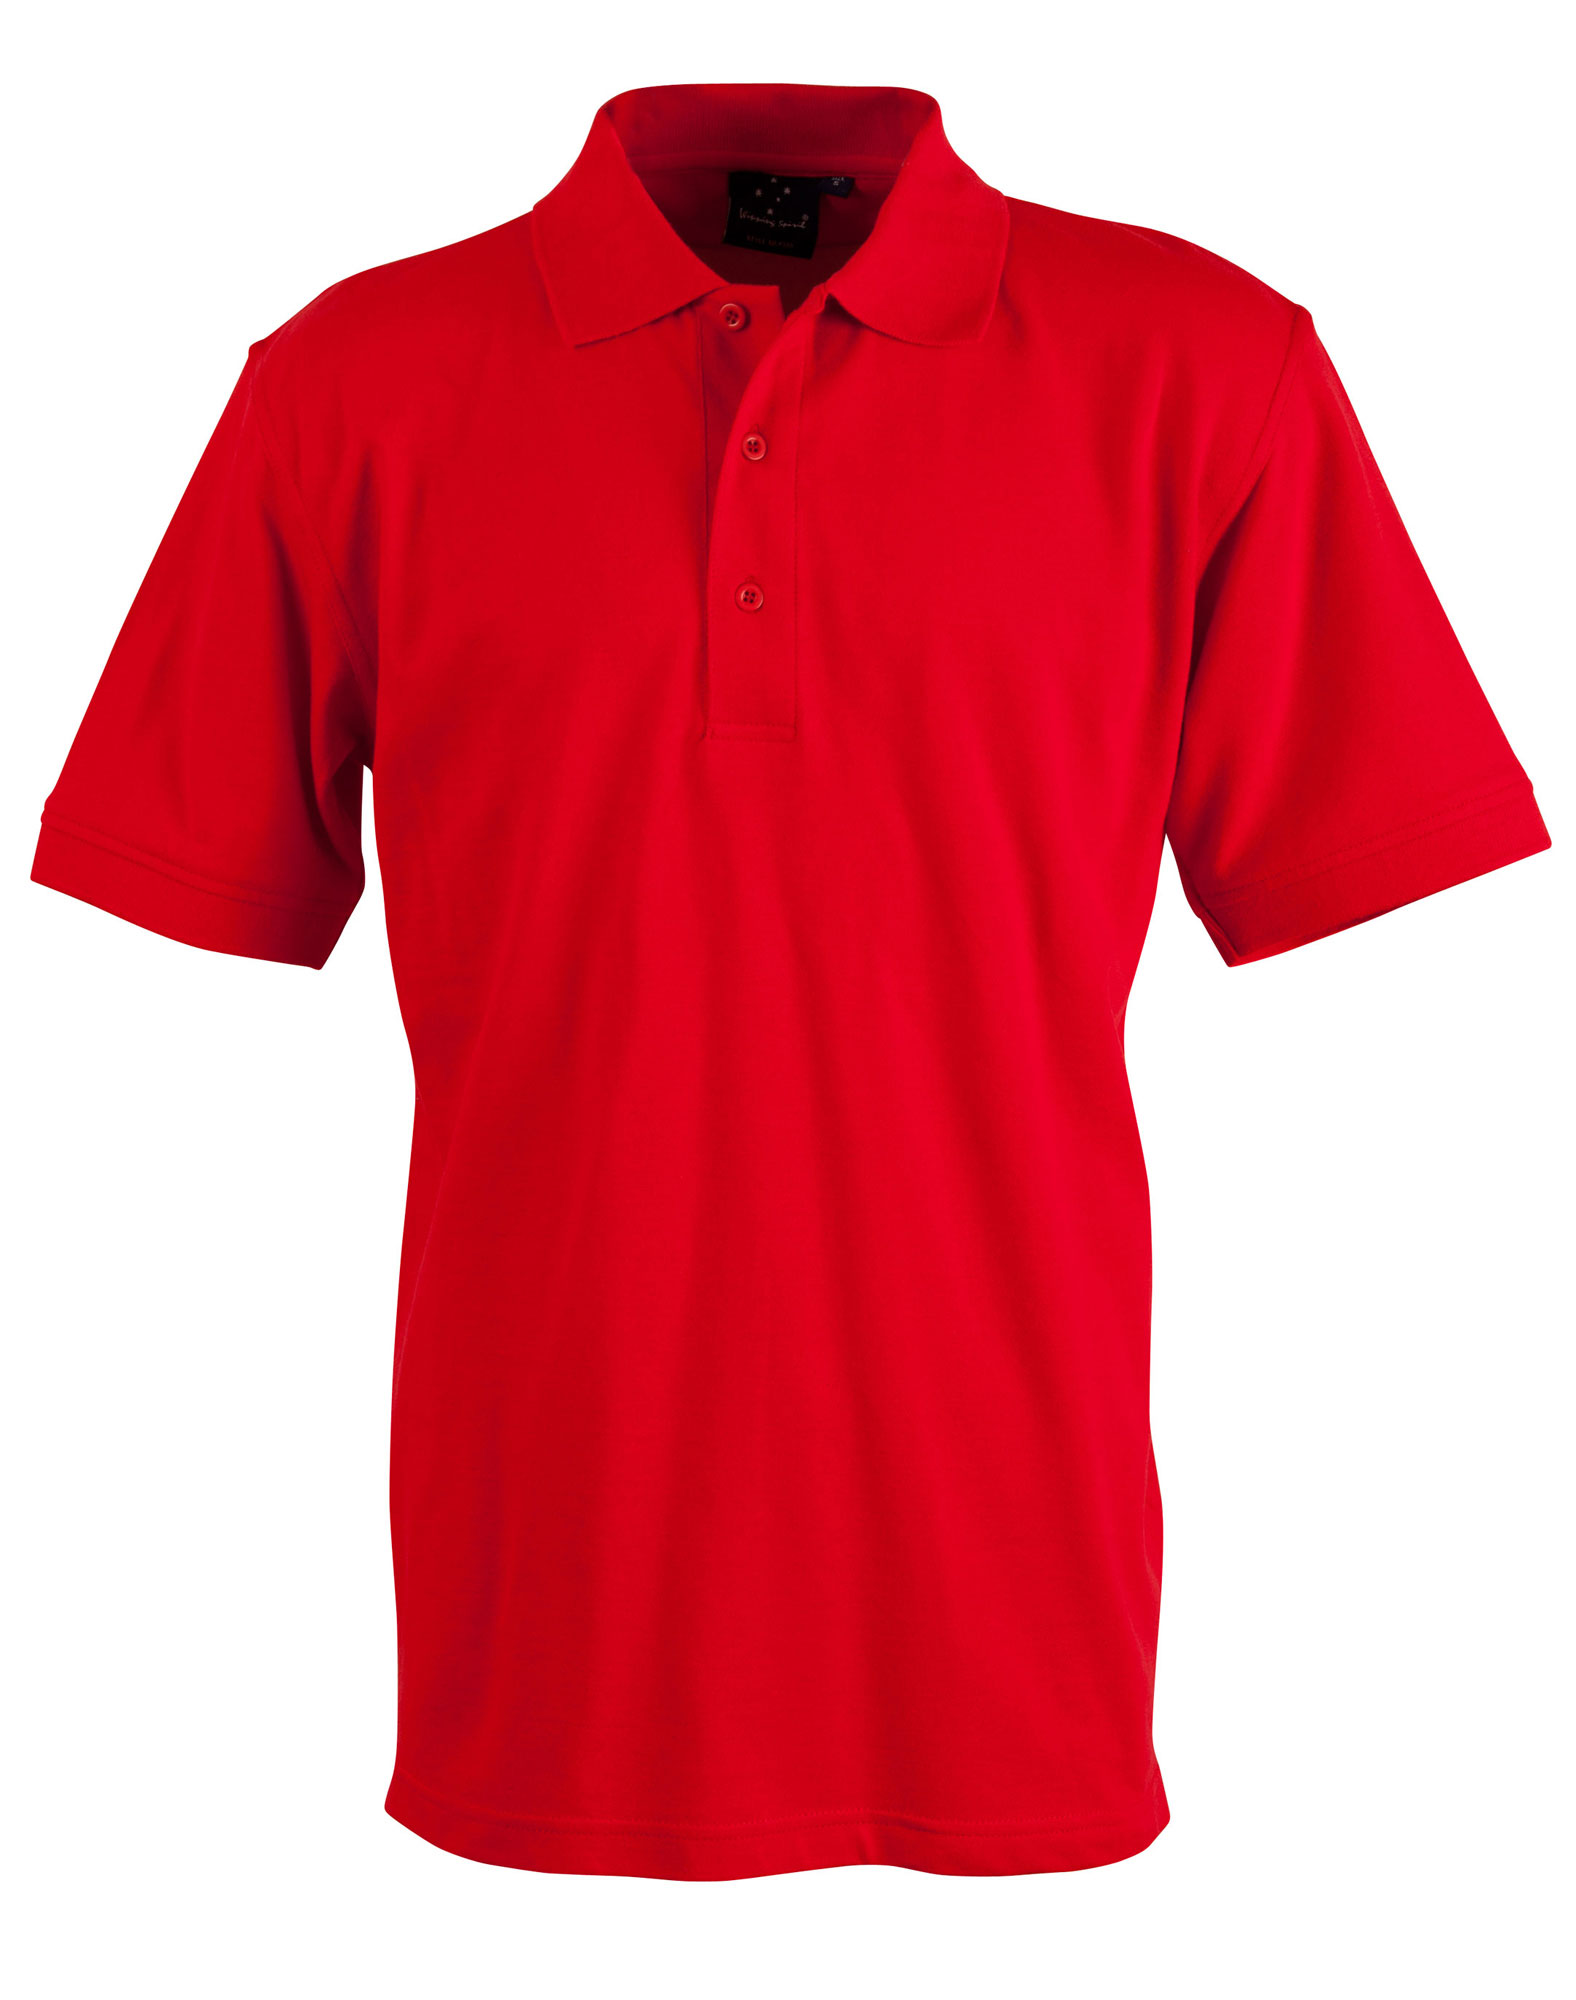 Custom Mens Pink Darling Harbour Cotton Stretch Polo Shirts backside Online Perth Australia